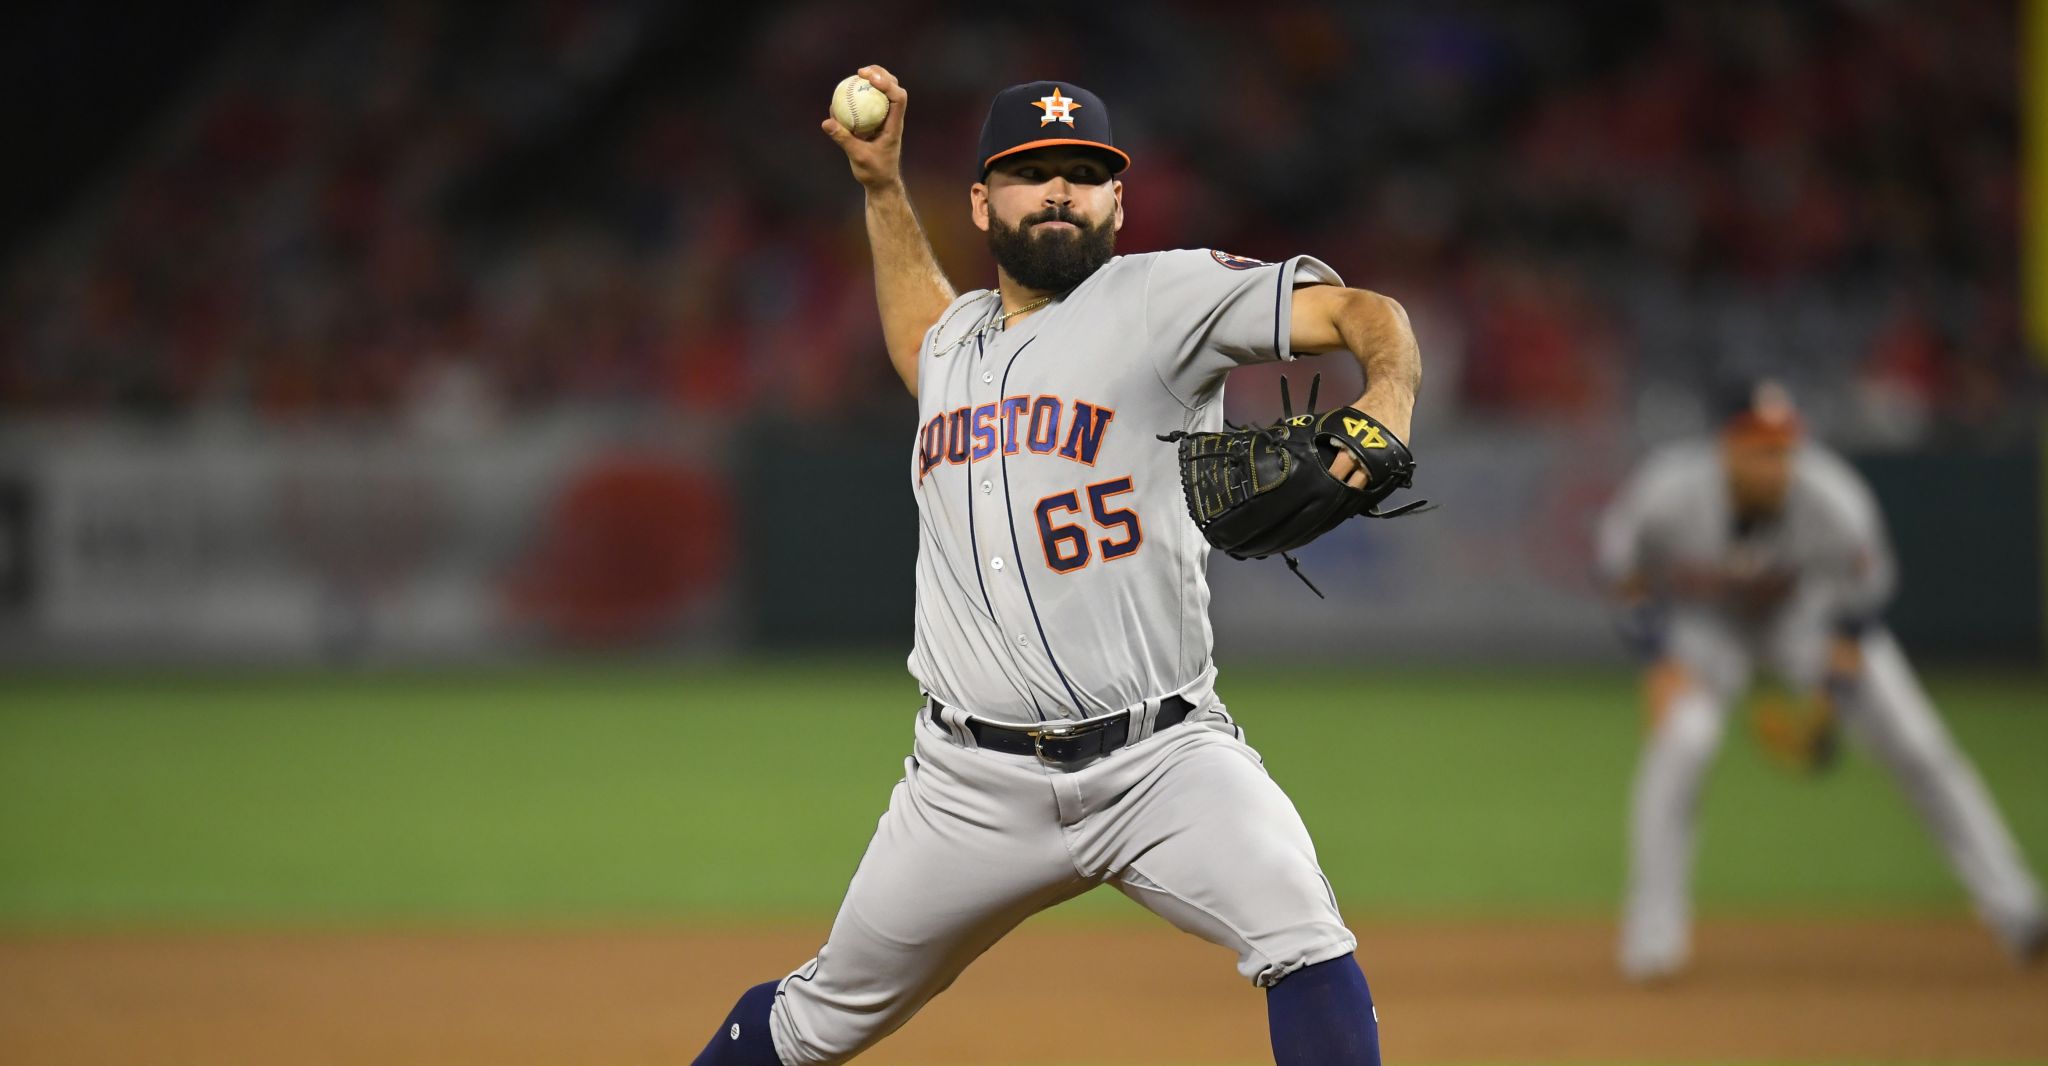 He absolutely factors in': Astros rookie Jose Urquidy has positioned  himself well for next season - The Athletic